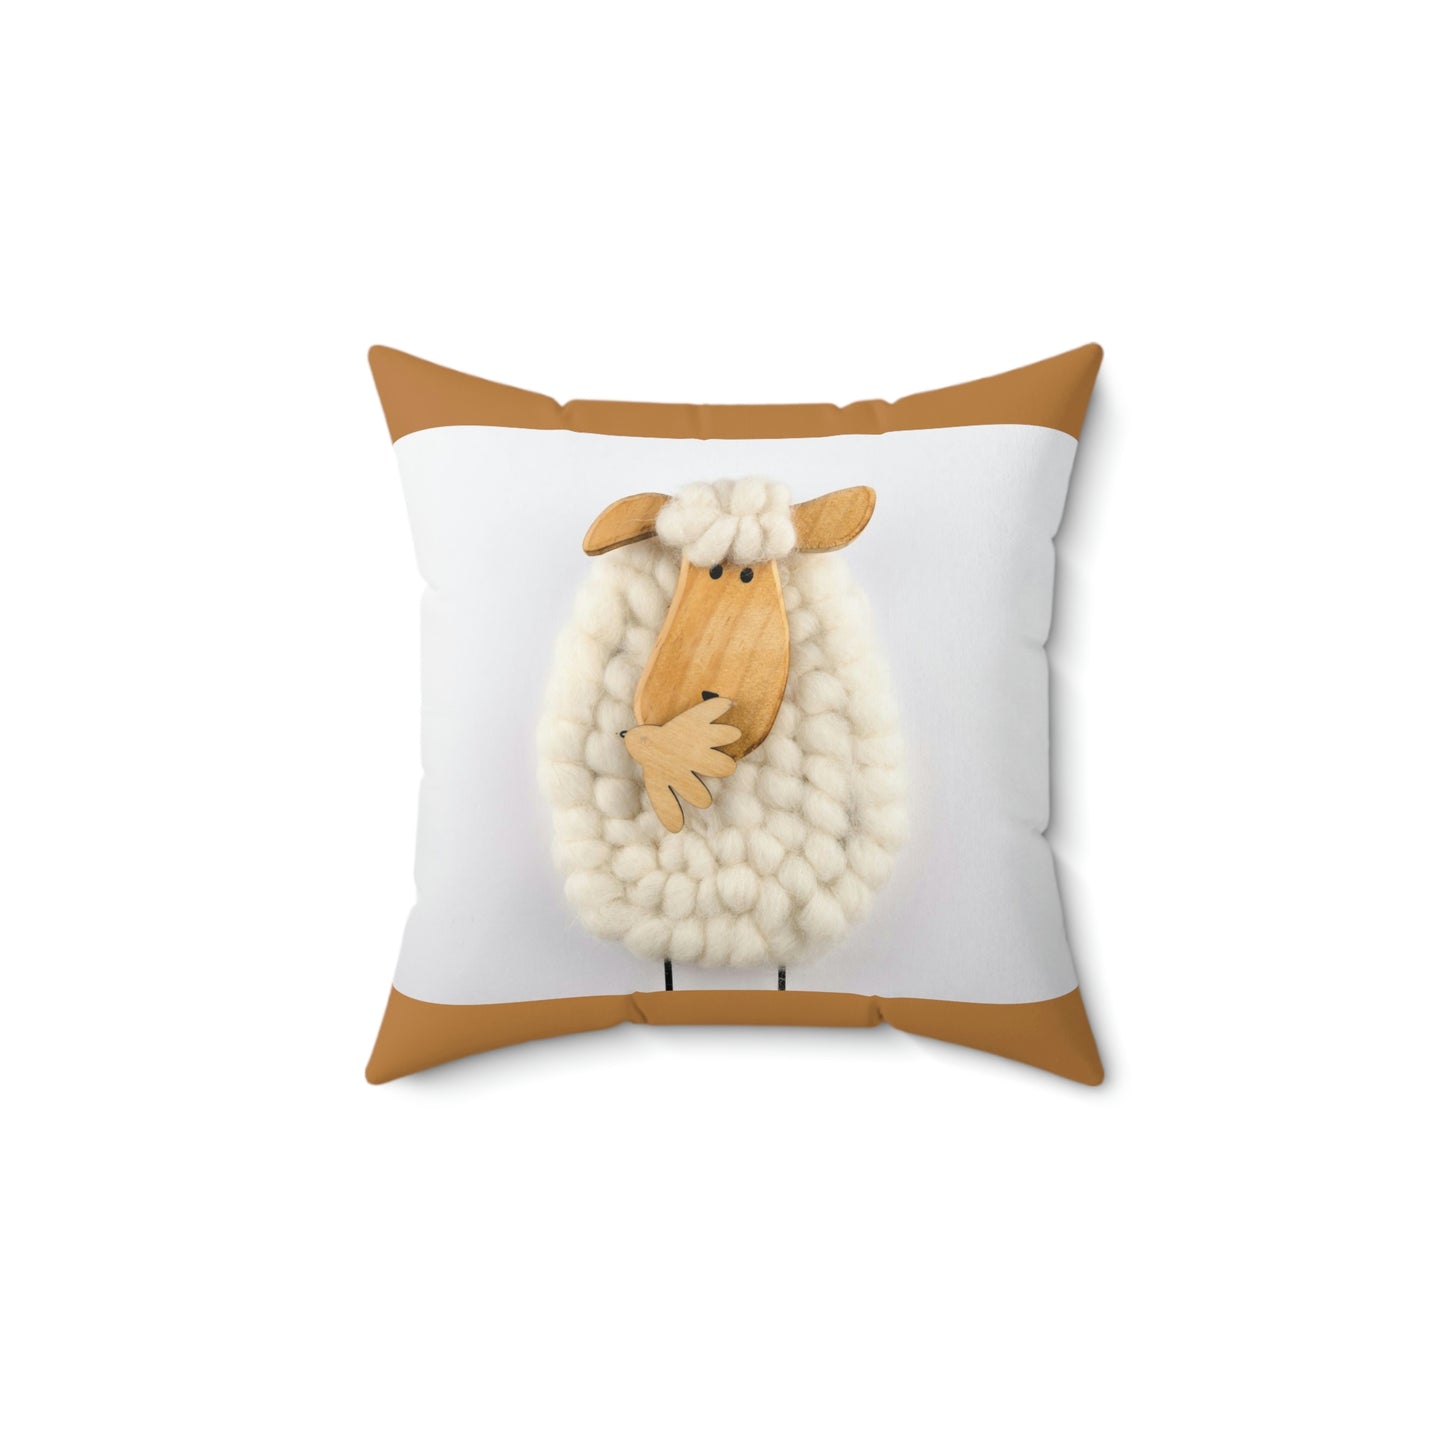 Sheep Pillow Case - Gold and White Colors - Faux Suede Square Pillow Case